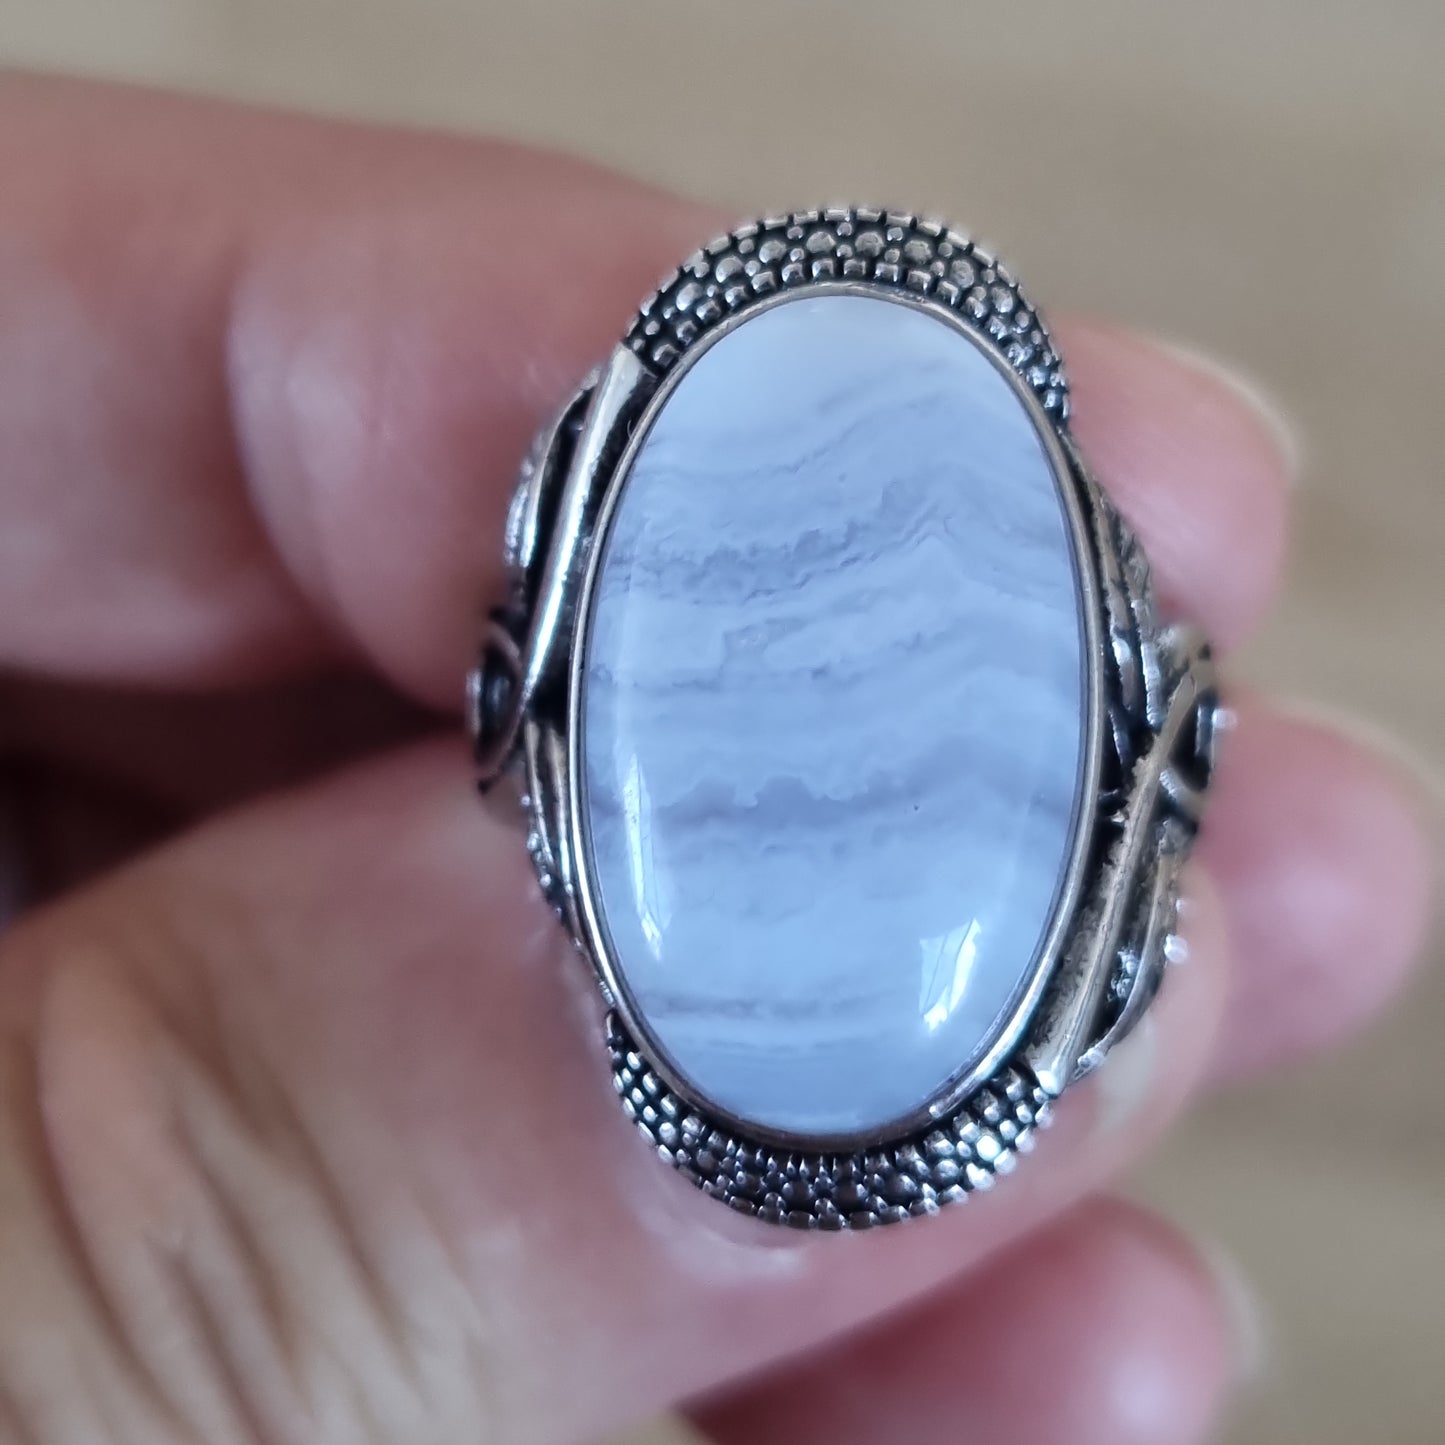 Agate lace ring